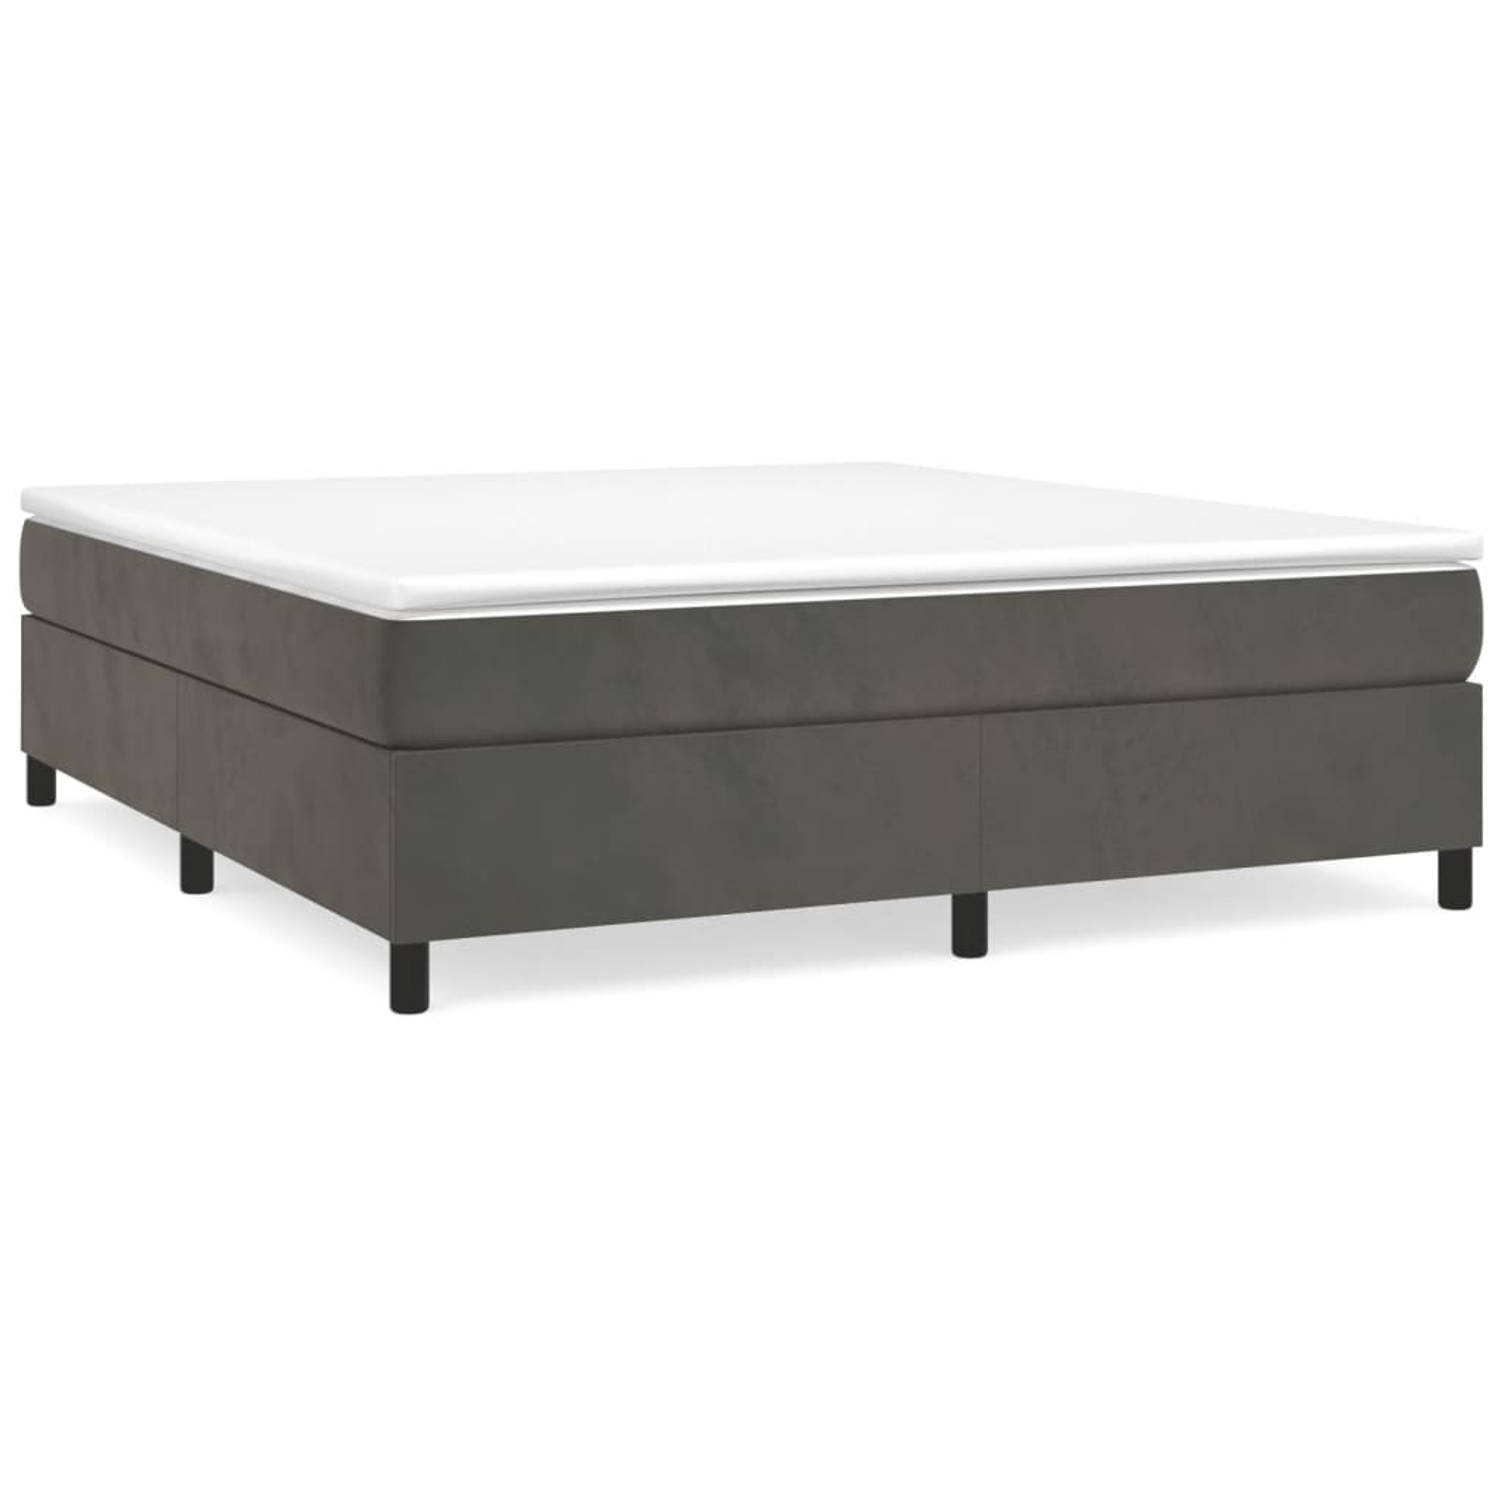 The Living Store Boxspringframe fluweel donkergrijs 200x200 cm - Bed